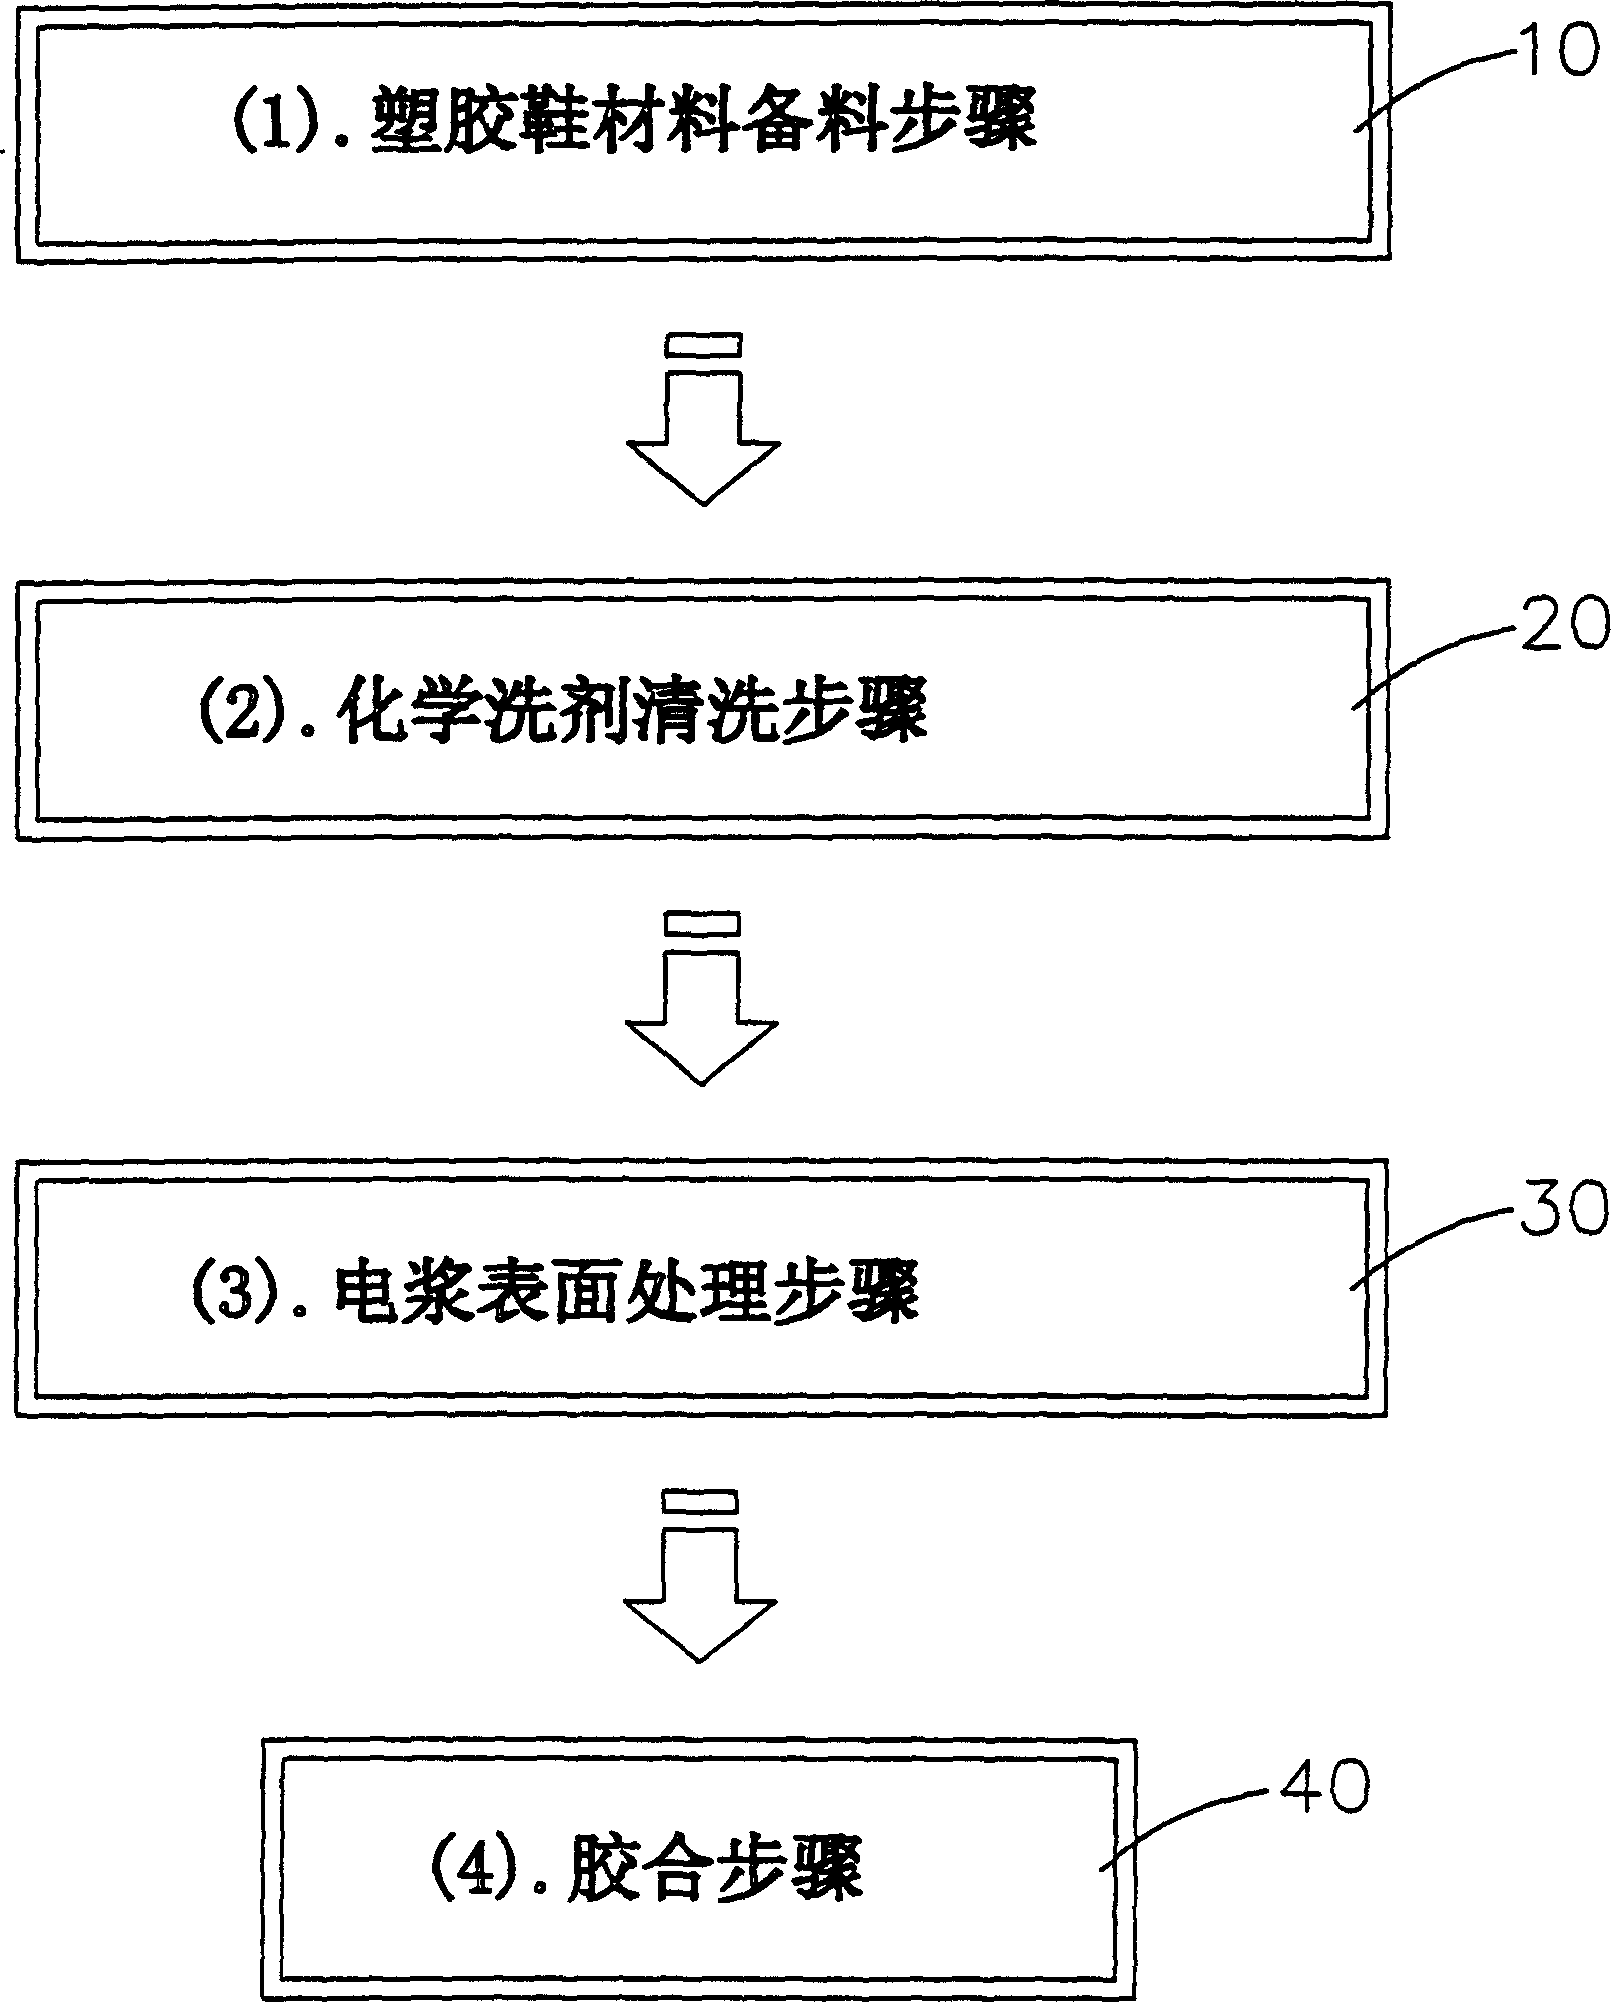 Electric plasm glue processing method for shoes material